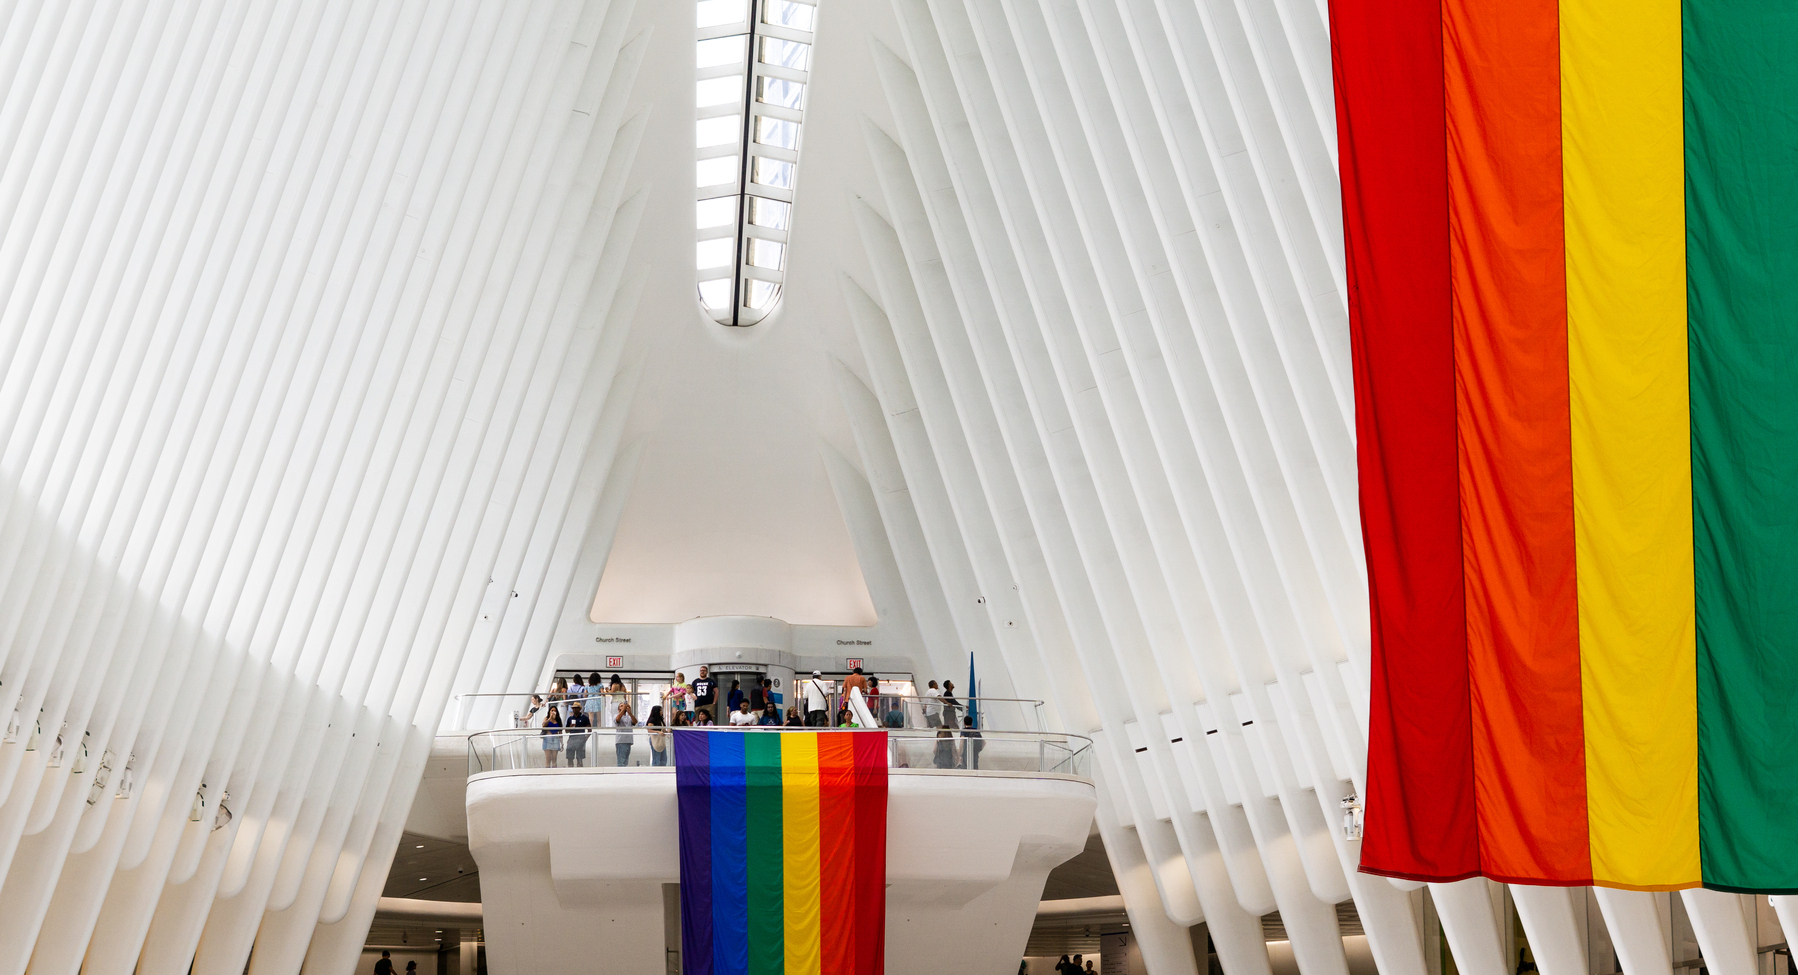 The inside of the Wesfield World Trade Center, where the white beams that look like the ribs of a giant dinosaur can be seen. There are two pride flags; one at the foreground at the right side of the photo, and one at the center, hanging from one of the balconies inside